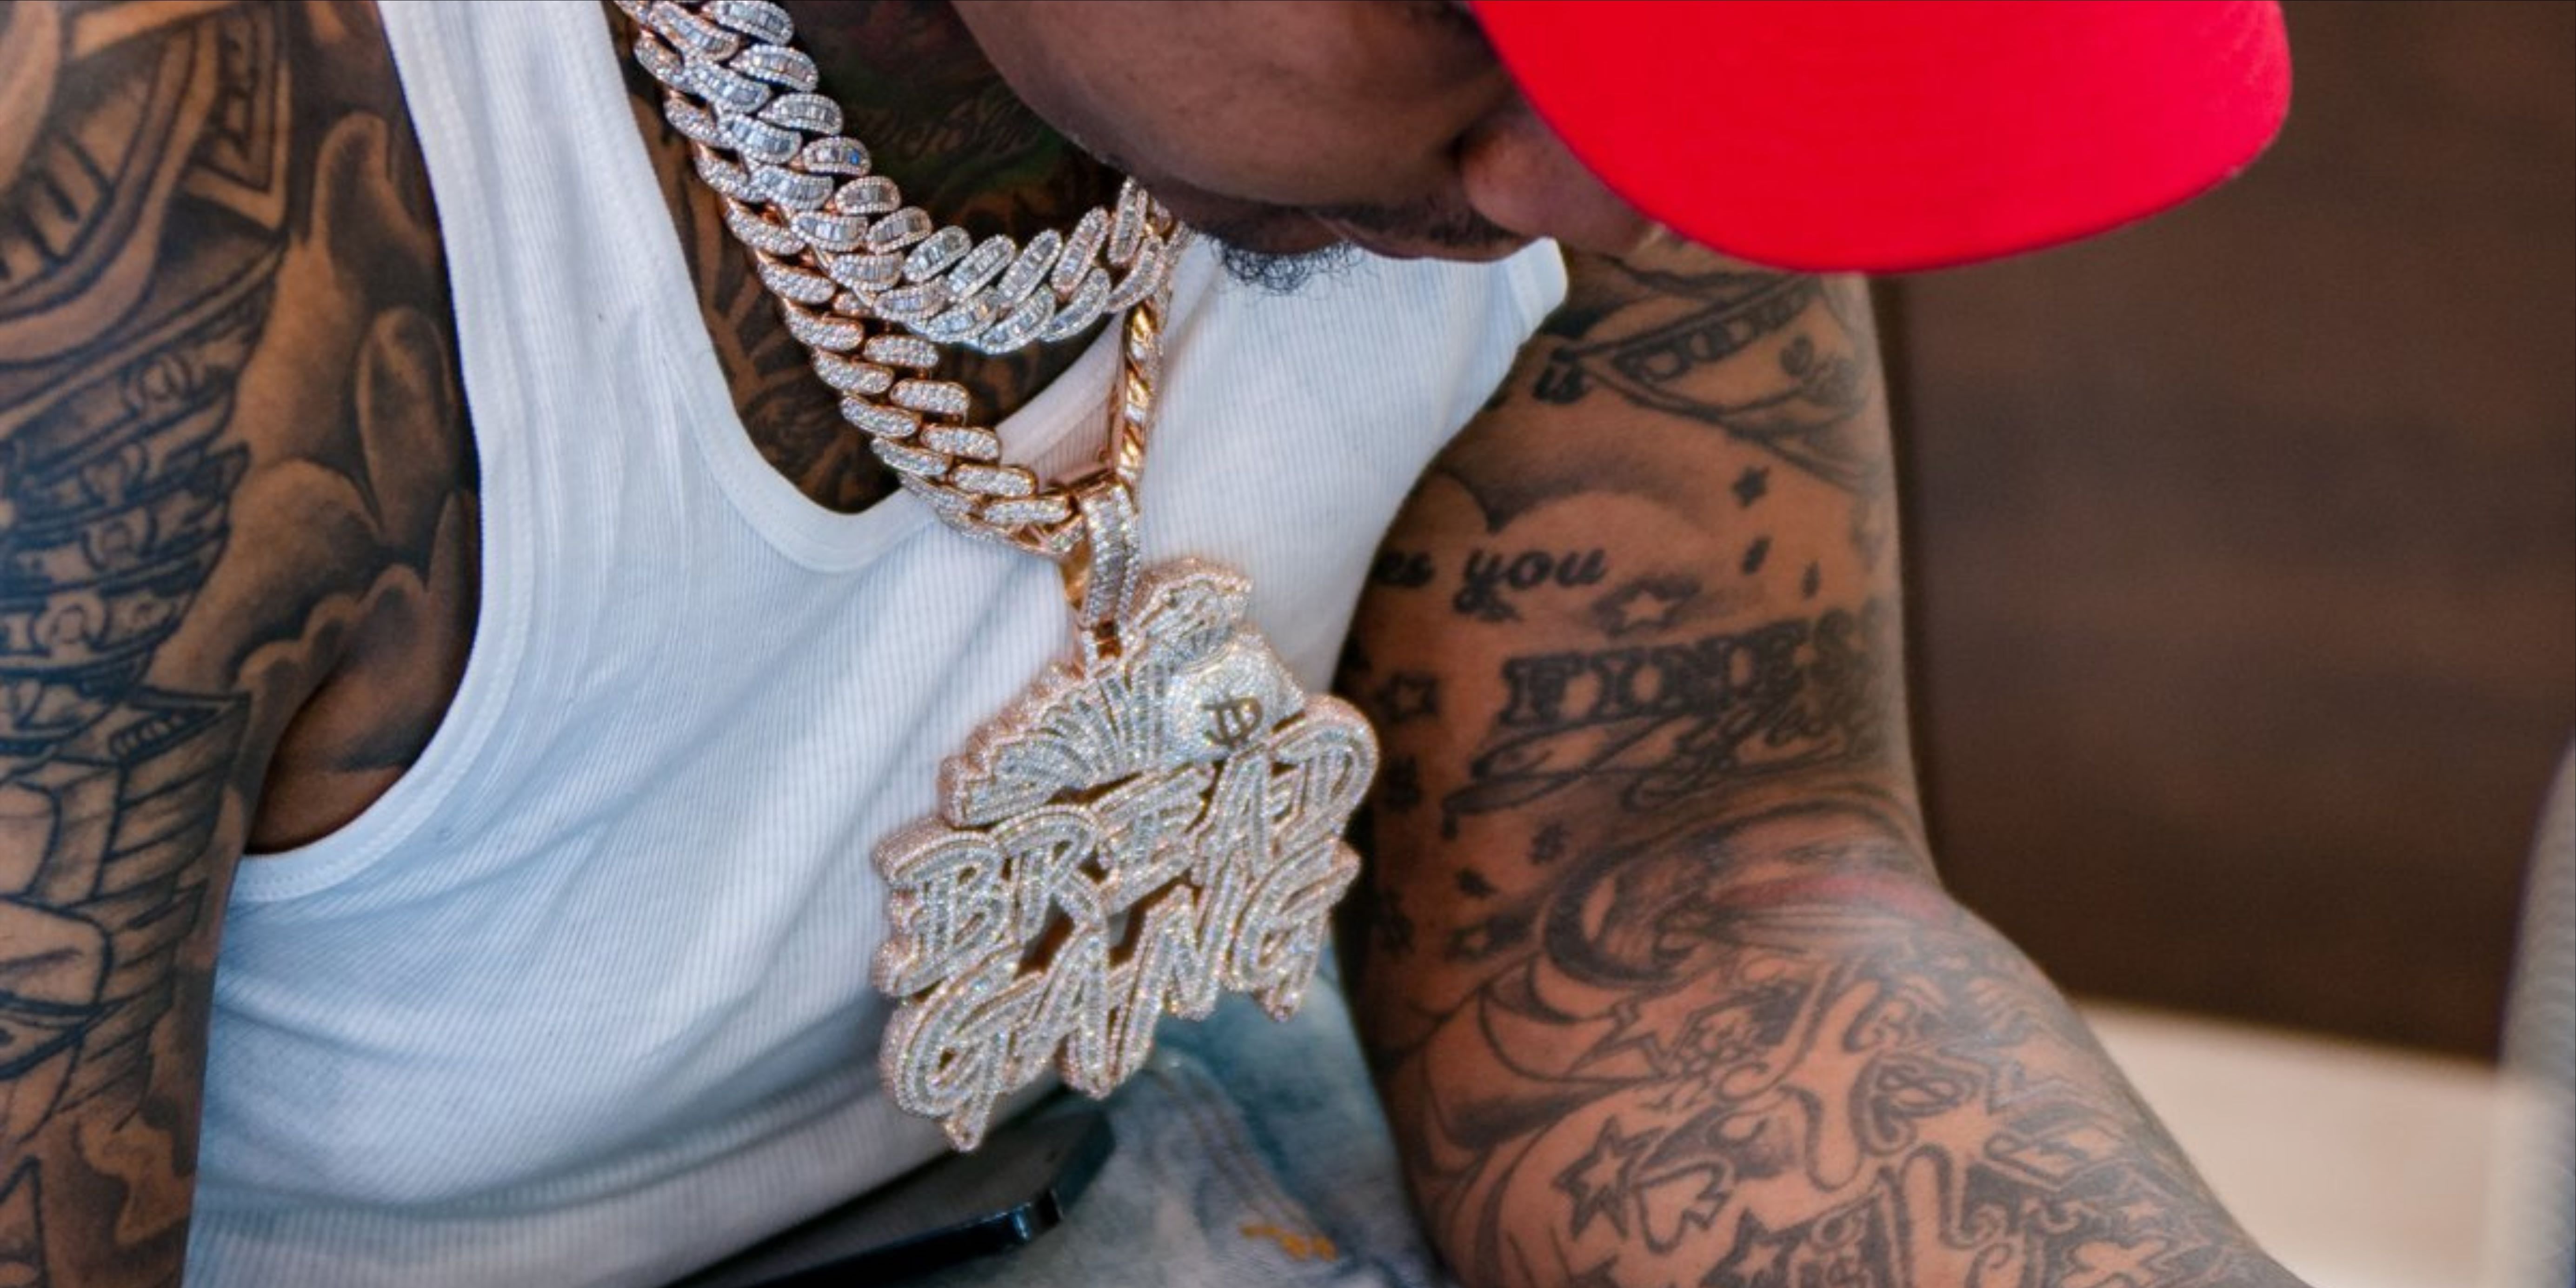 Read All The Lyrics To Moneybagg Yo's New Project 'Time Served